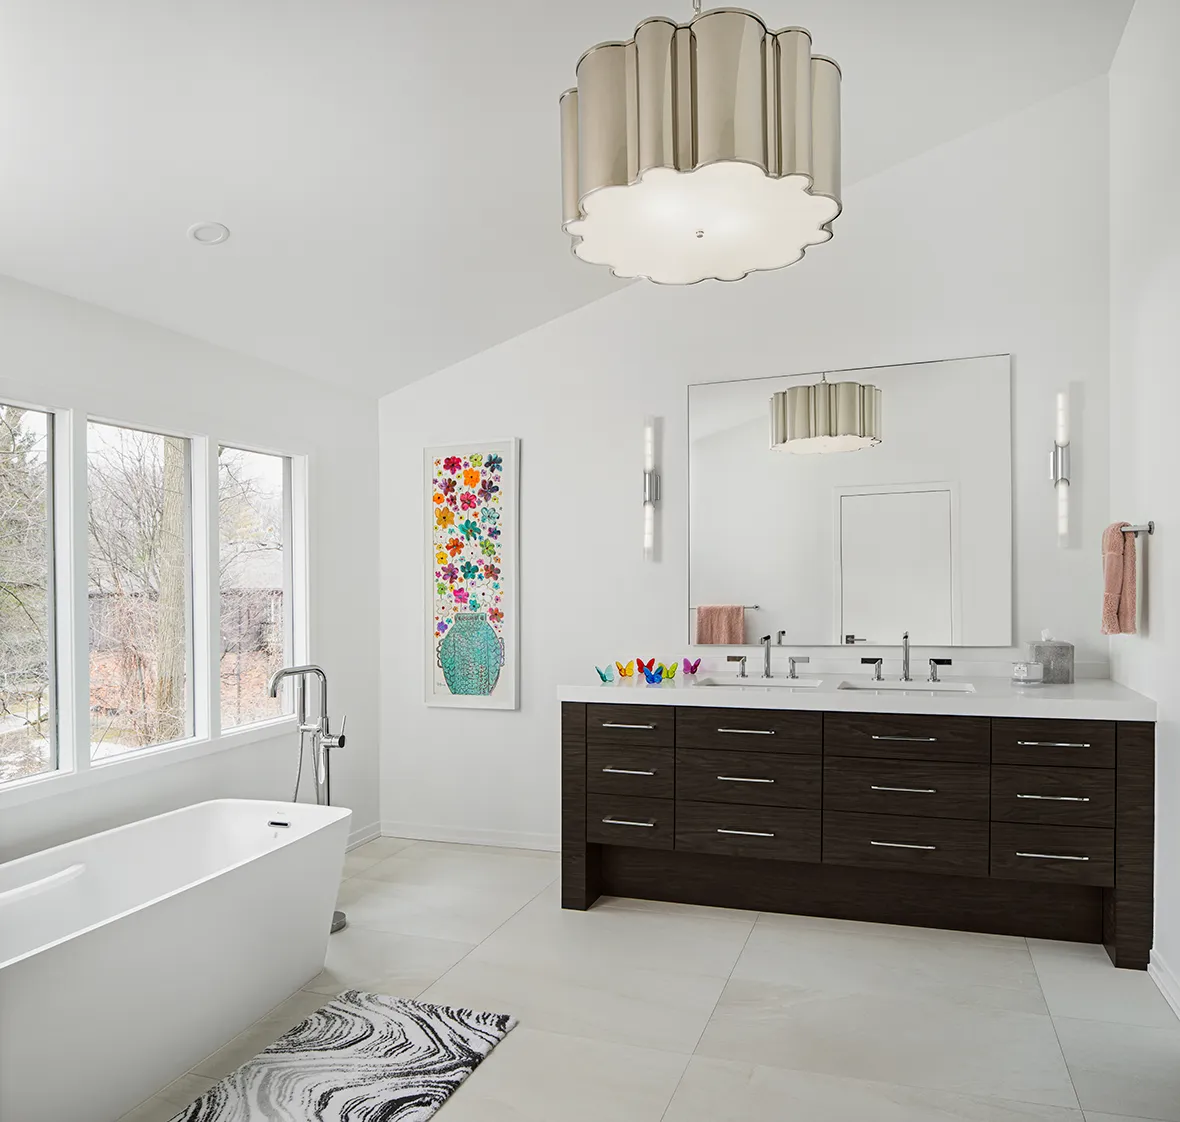 Forest Hill Diamond Building Bathroom Remodeling Dark Wood Cabinetry and White Soaker Tub